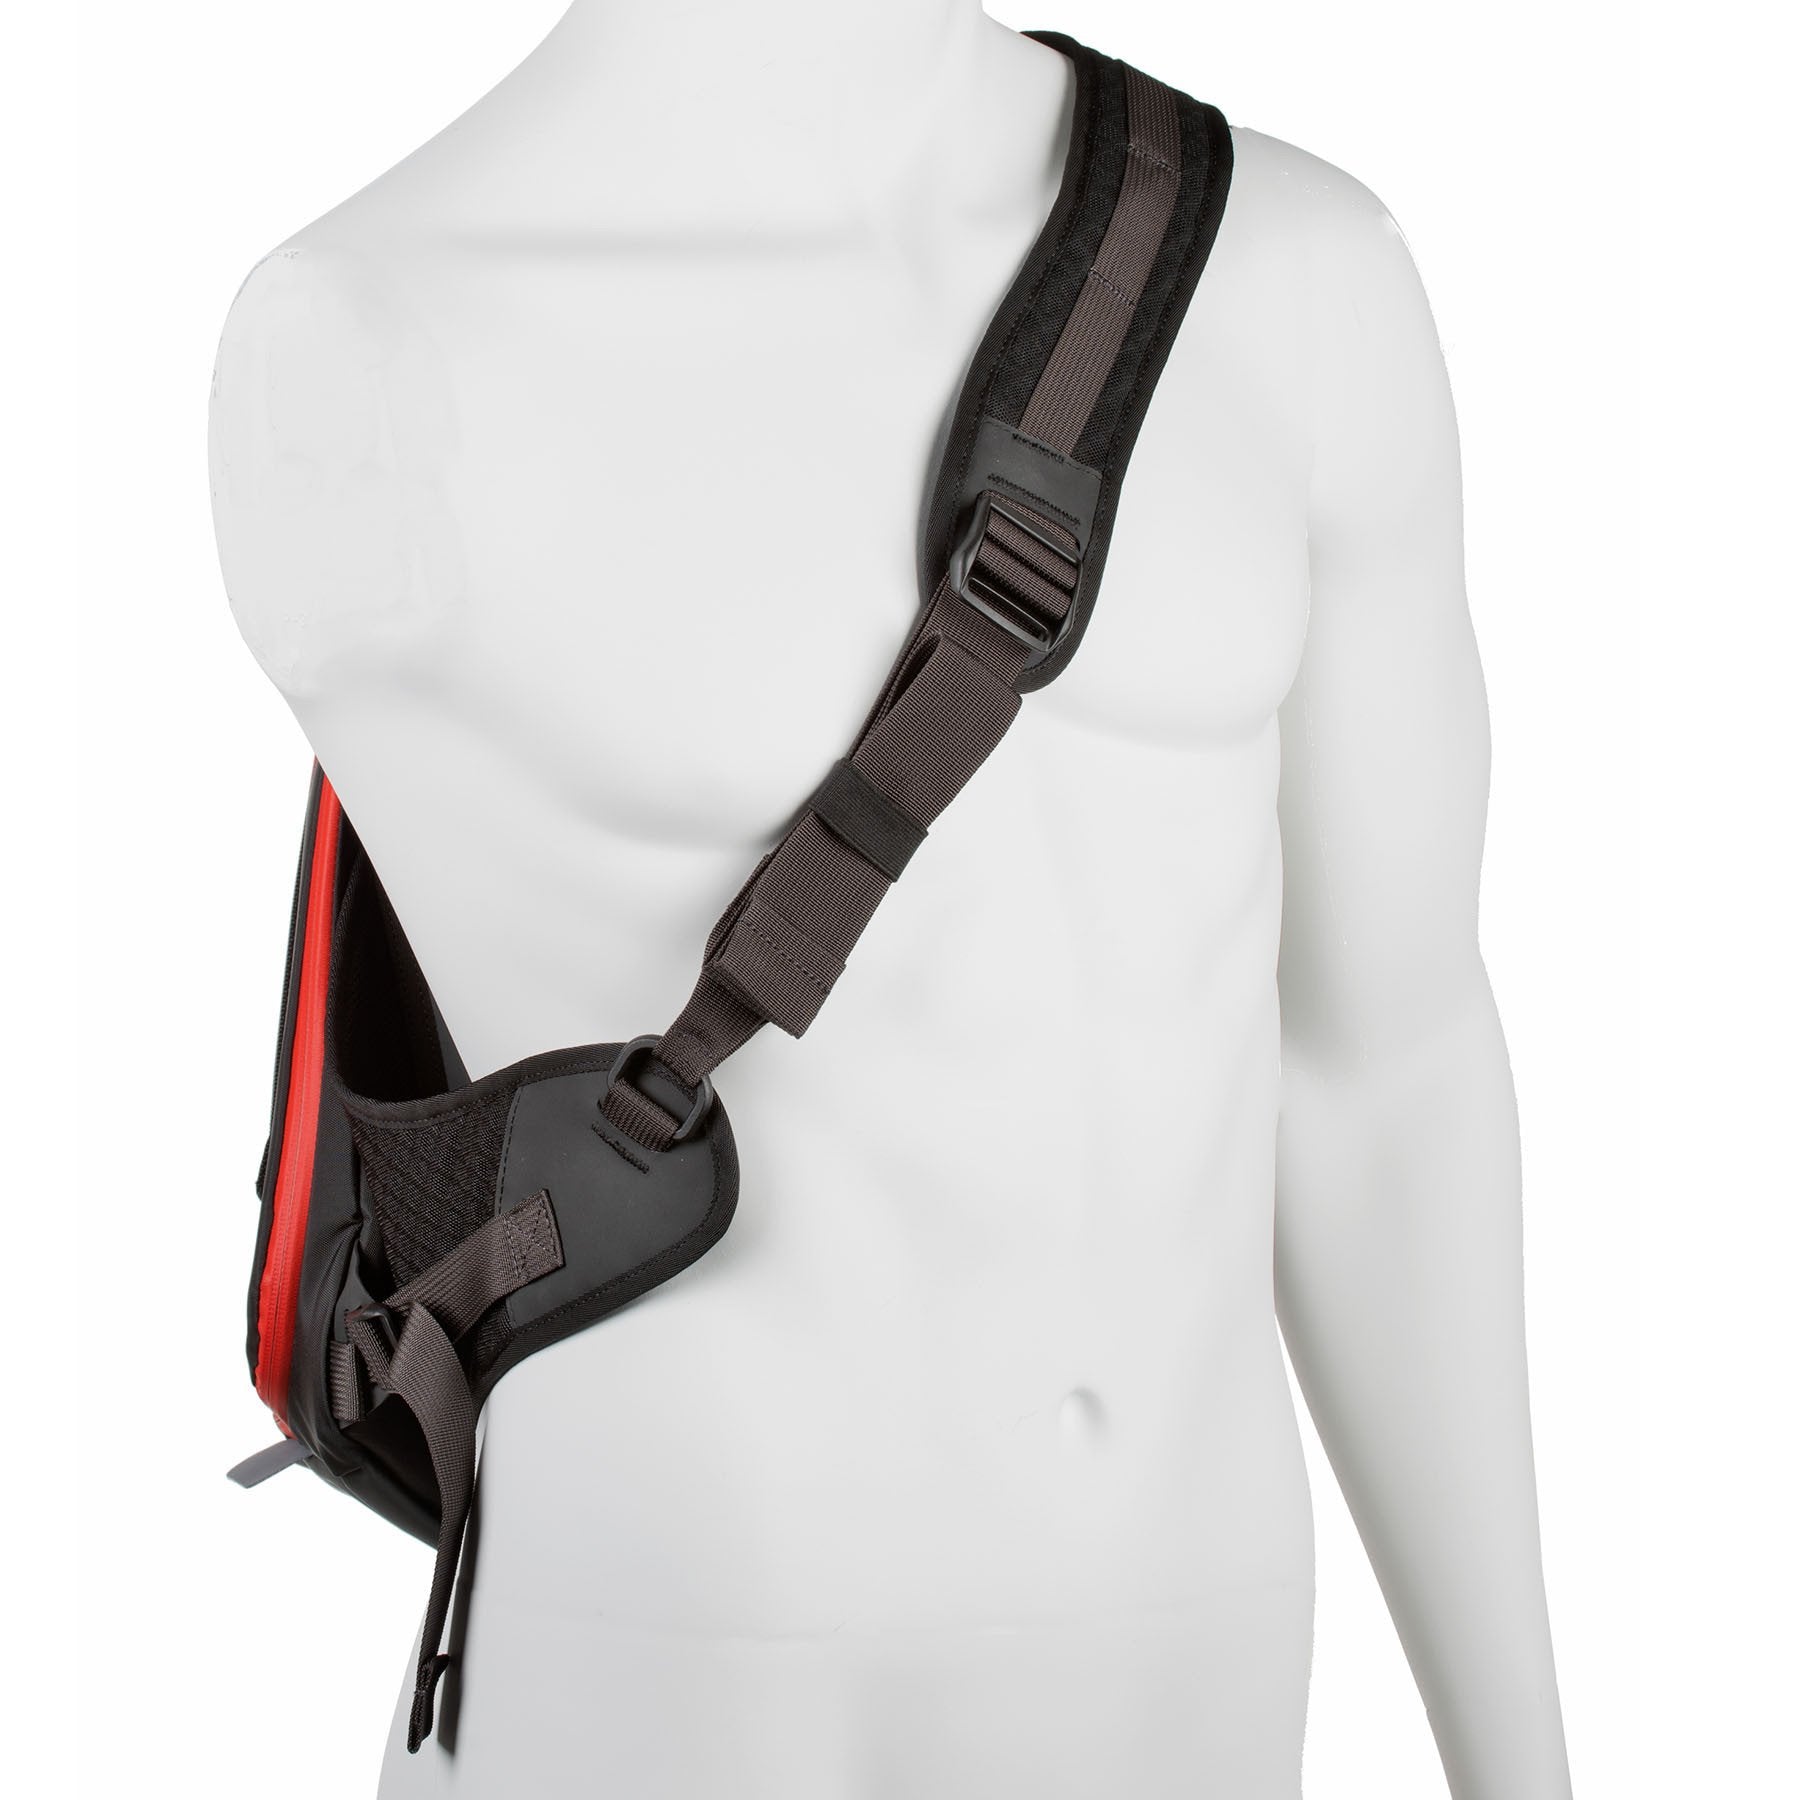 Superior comfort with body-conforming design, wide shoulder strap and stability wing